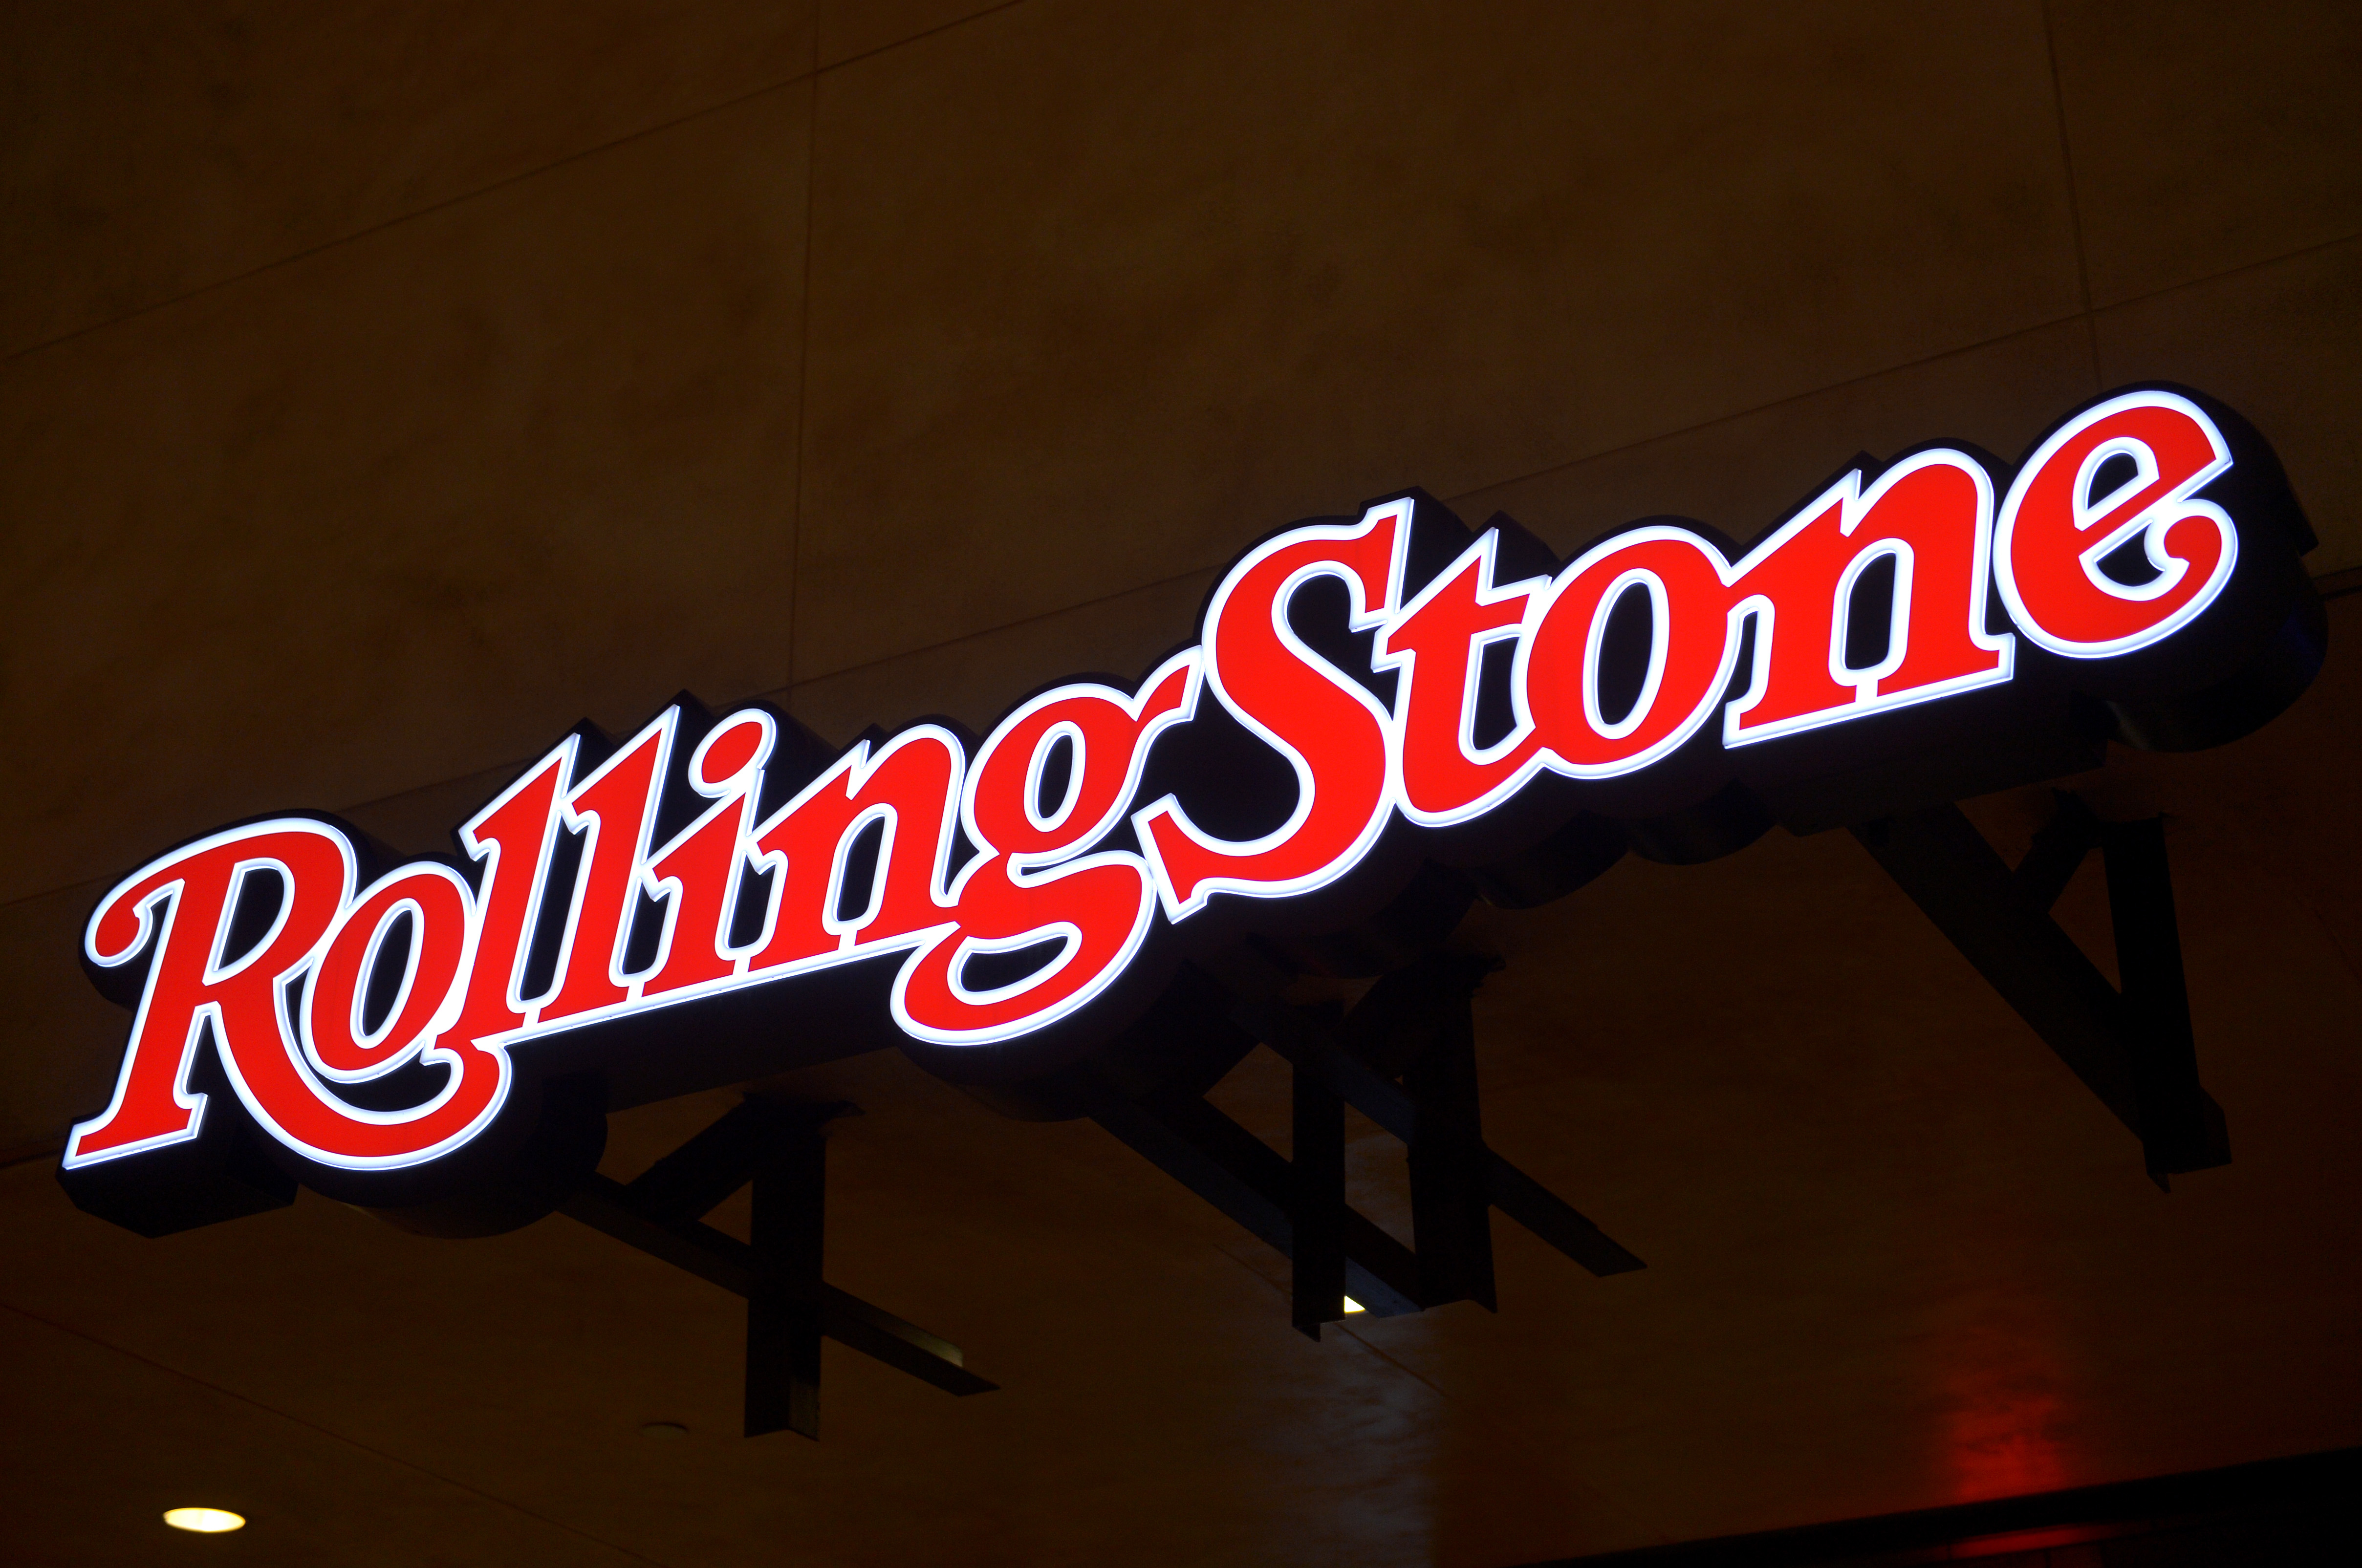 The Rolling Stone logo